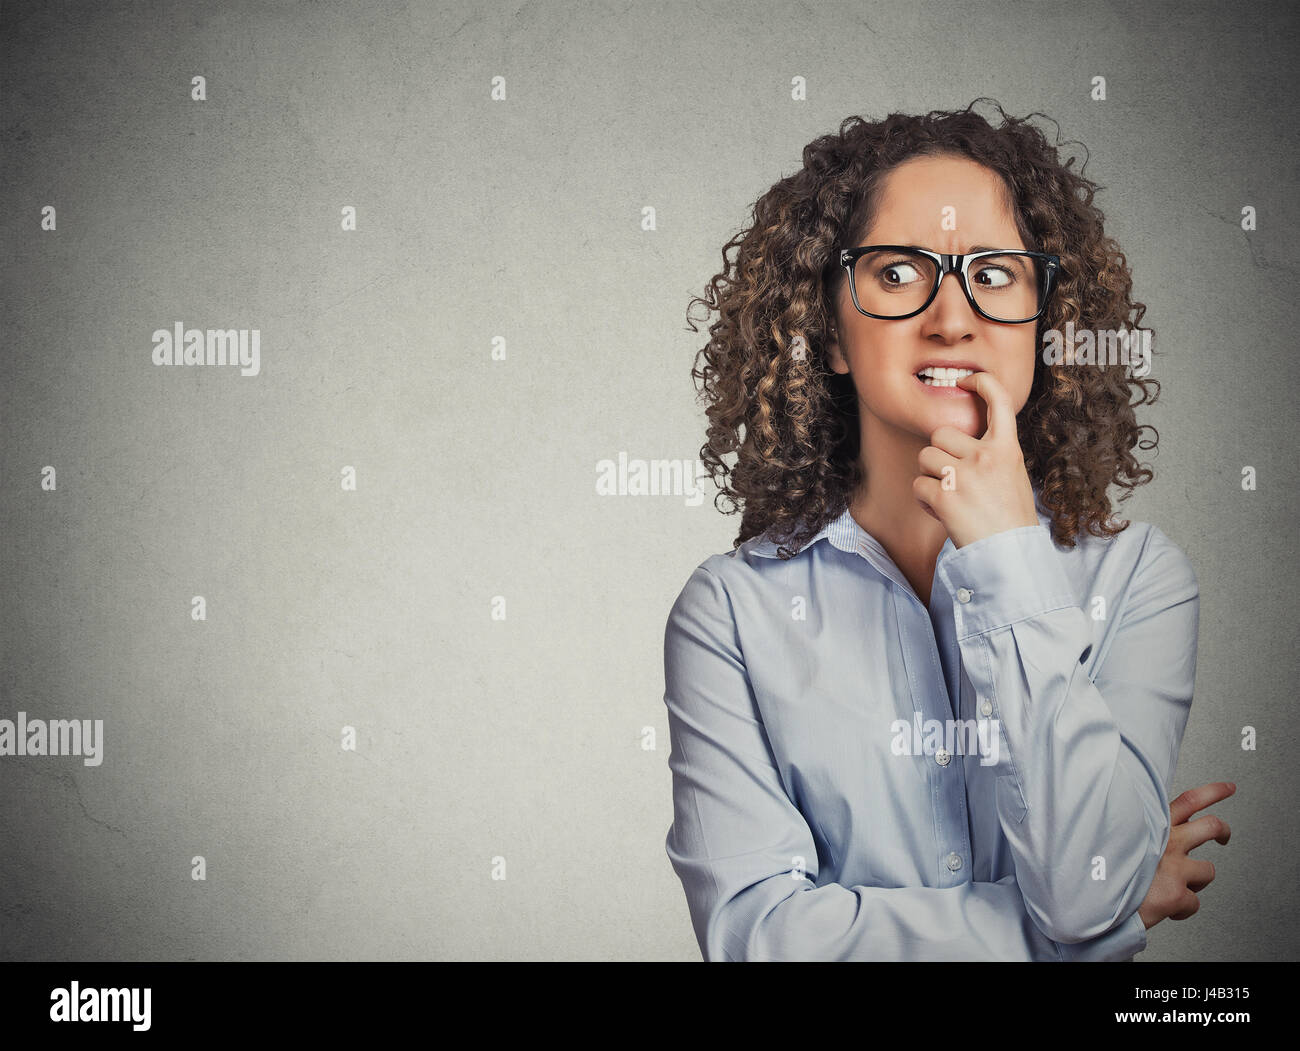 Closeup portrait nervous woman with glasses biting her fingernails craving for something, anxious isolated grey wall background with copy space. Negat Stock Photo